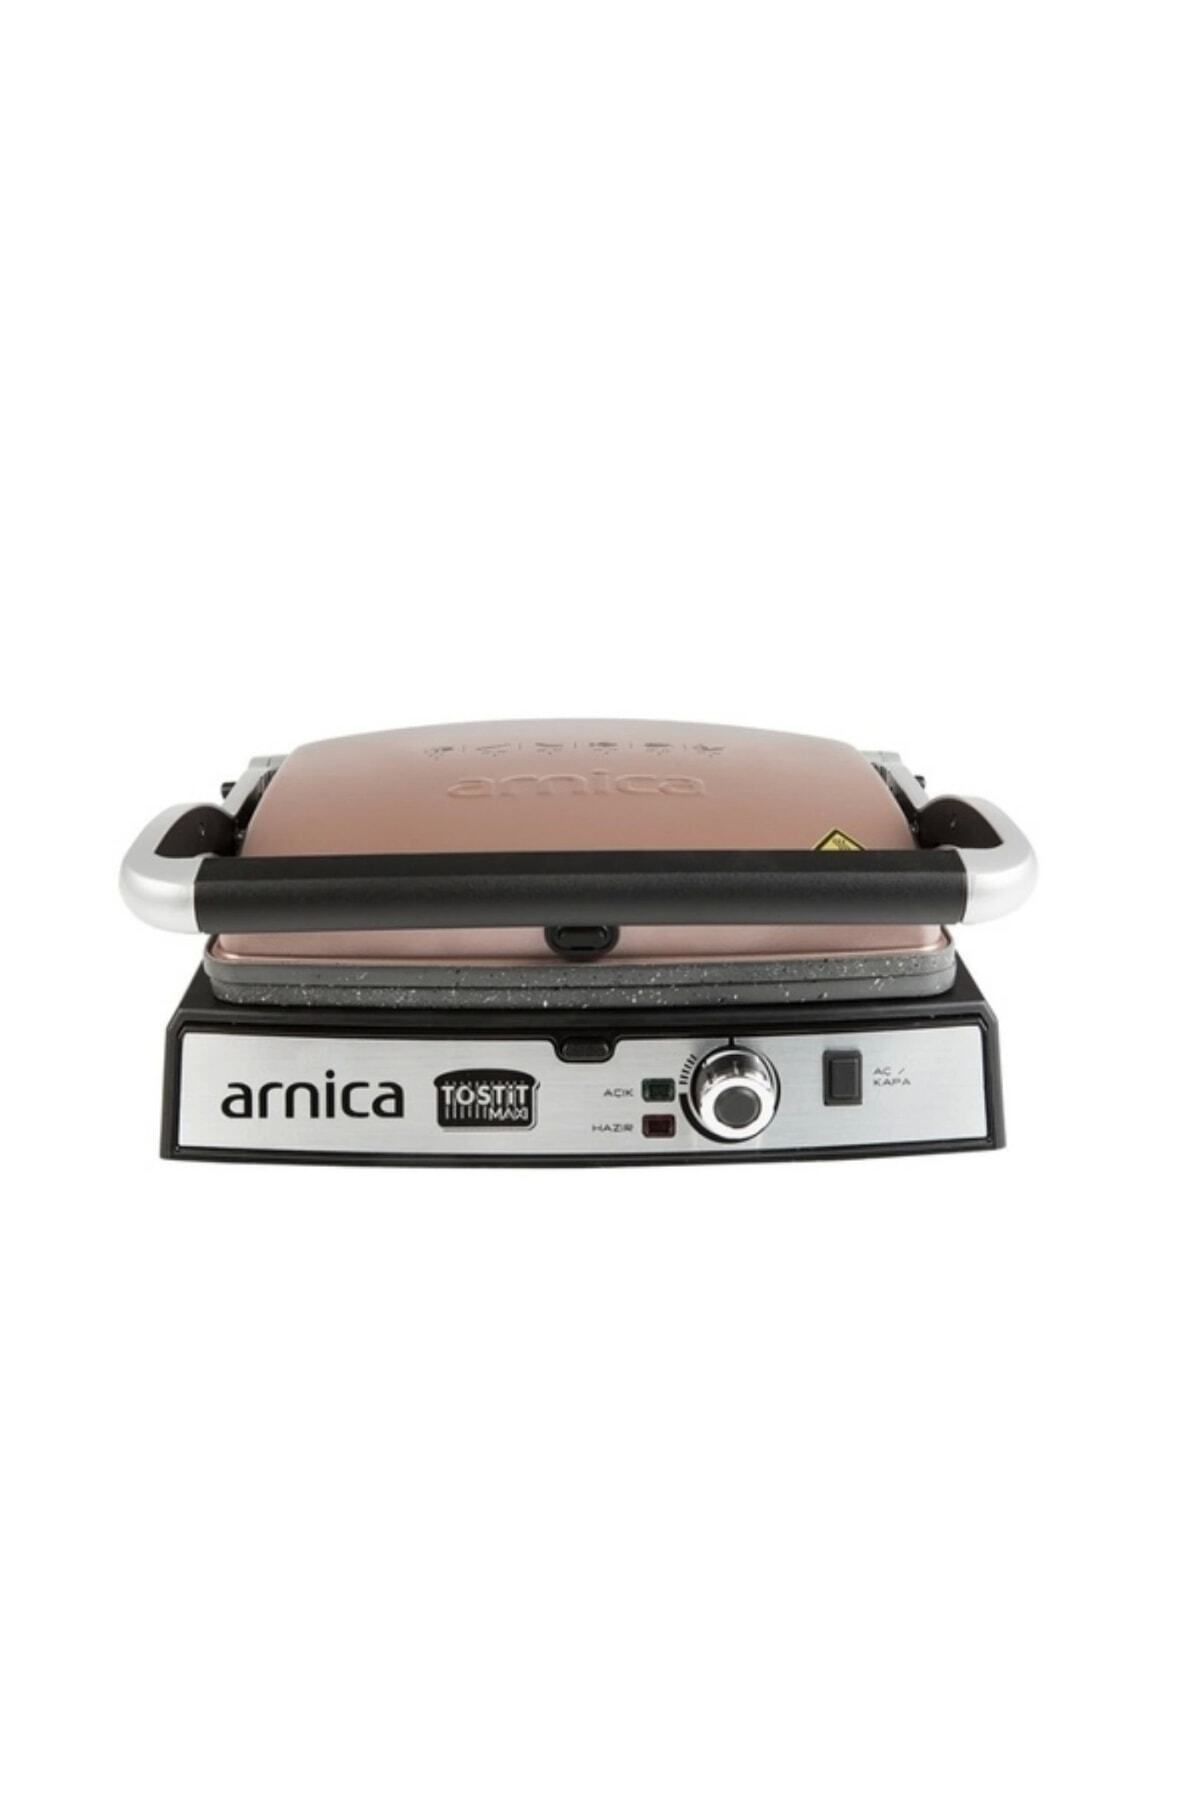 Arnica Gh26244 Tostit Maxi Tost Makinesi